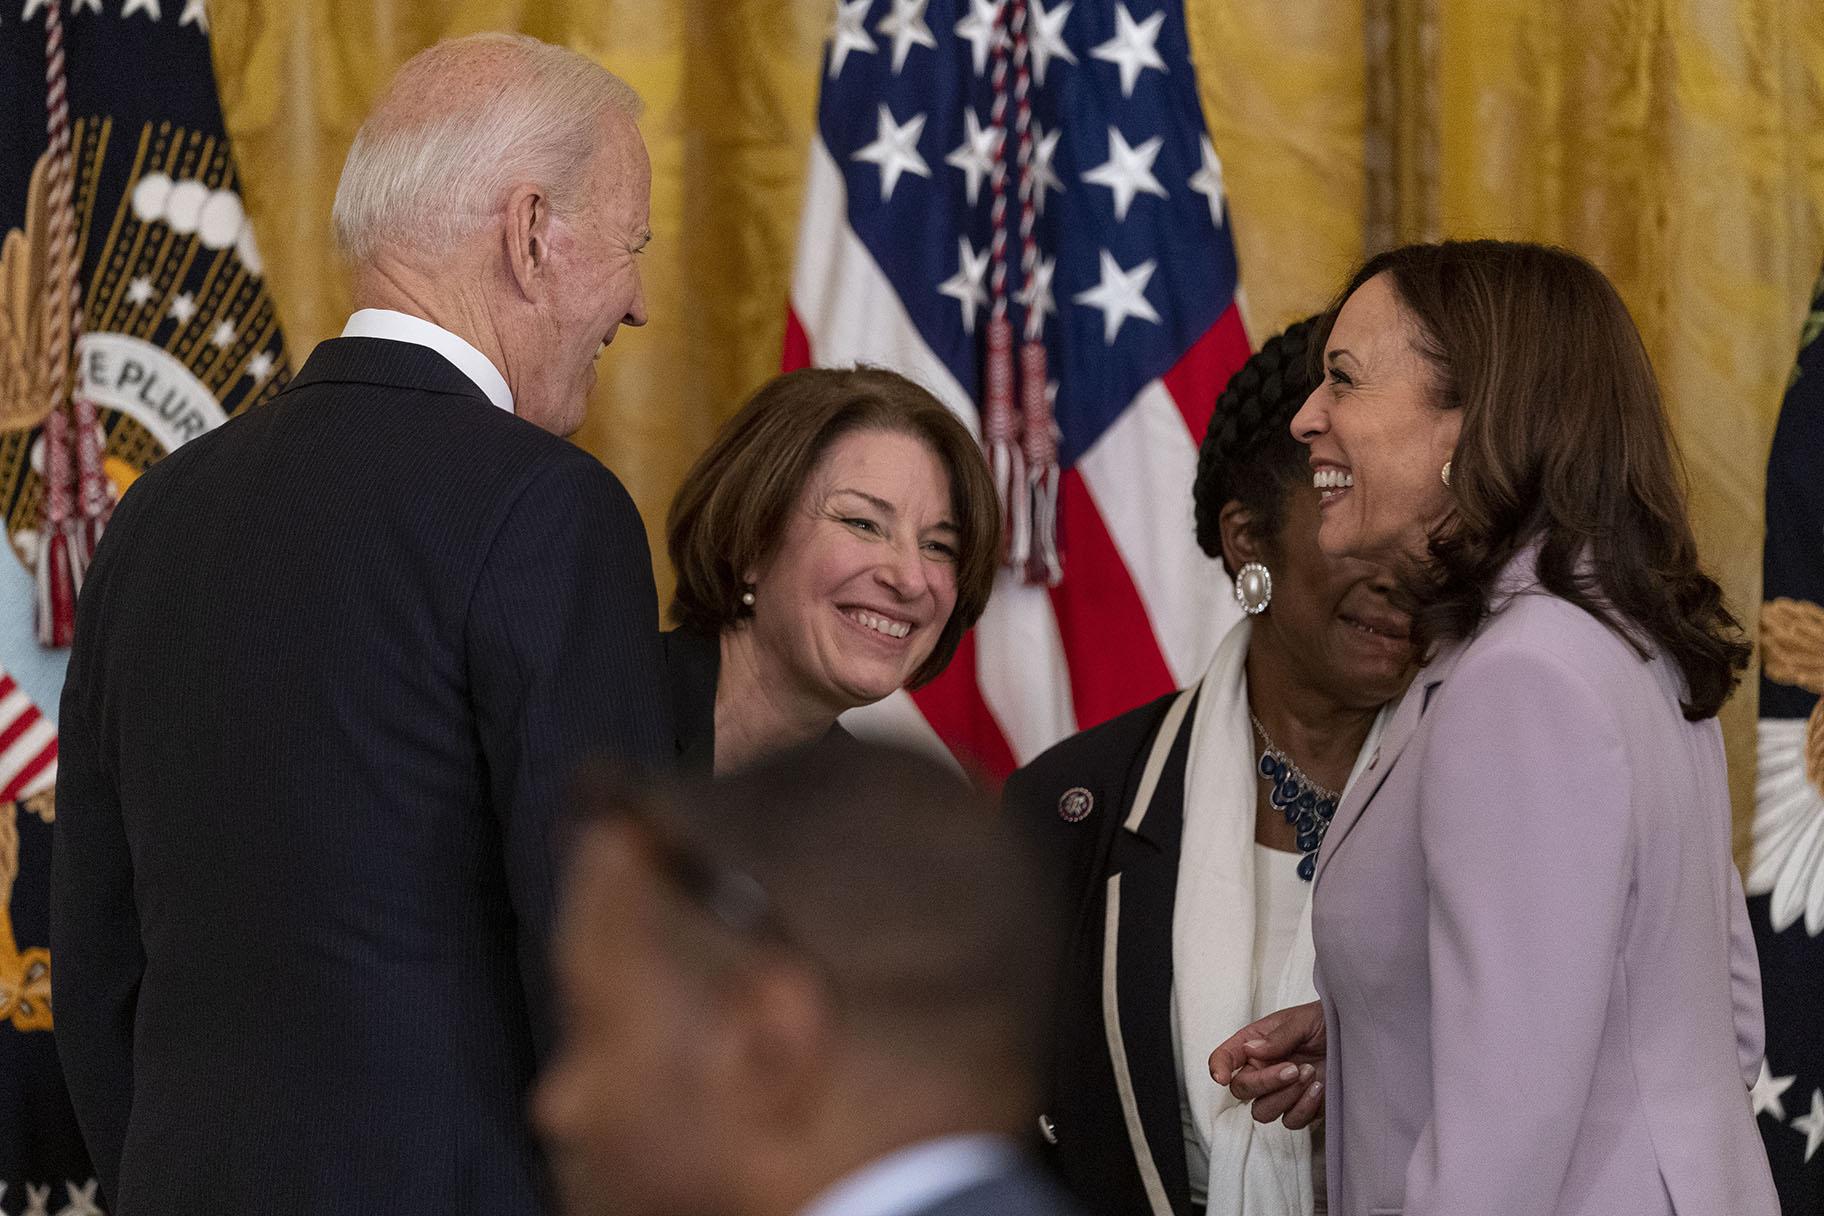 President Joe Biden, Sen. Amy Klobuchar, D-Minn., center, and Vice President Kamala Harris, right, share a laugh after the president signed H.R. 1652, the VOCA Fix to Sustain the Crime Victims Fund Act of 2021, in the East Room of the White House in Washington, Thursday, July 22, 2021. (AP Photo / Andrew Harnik)